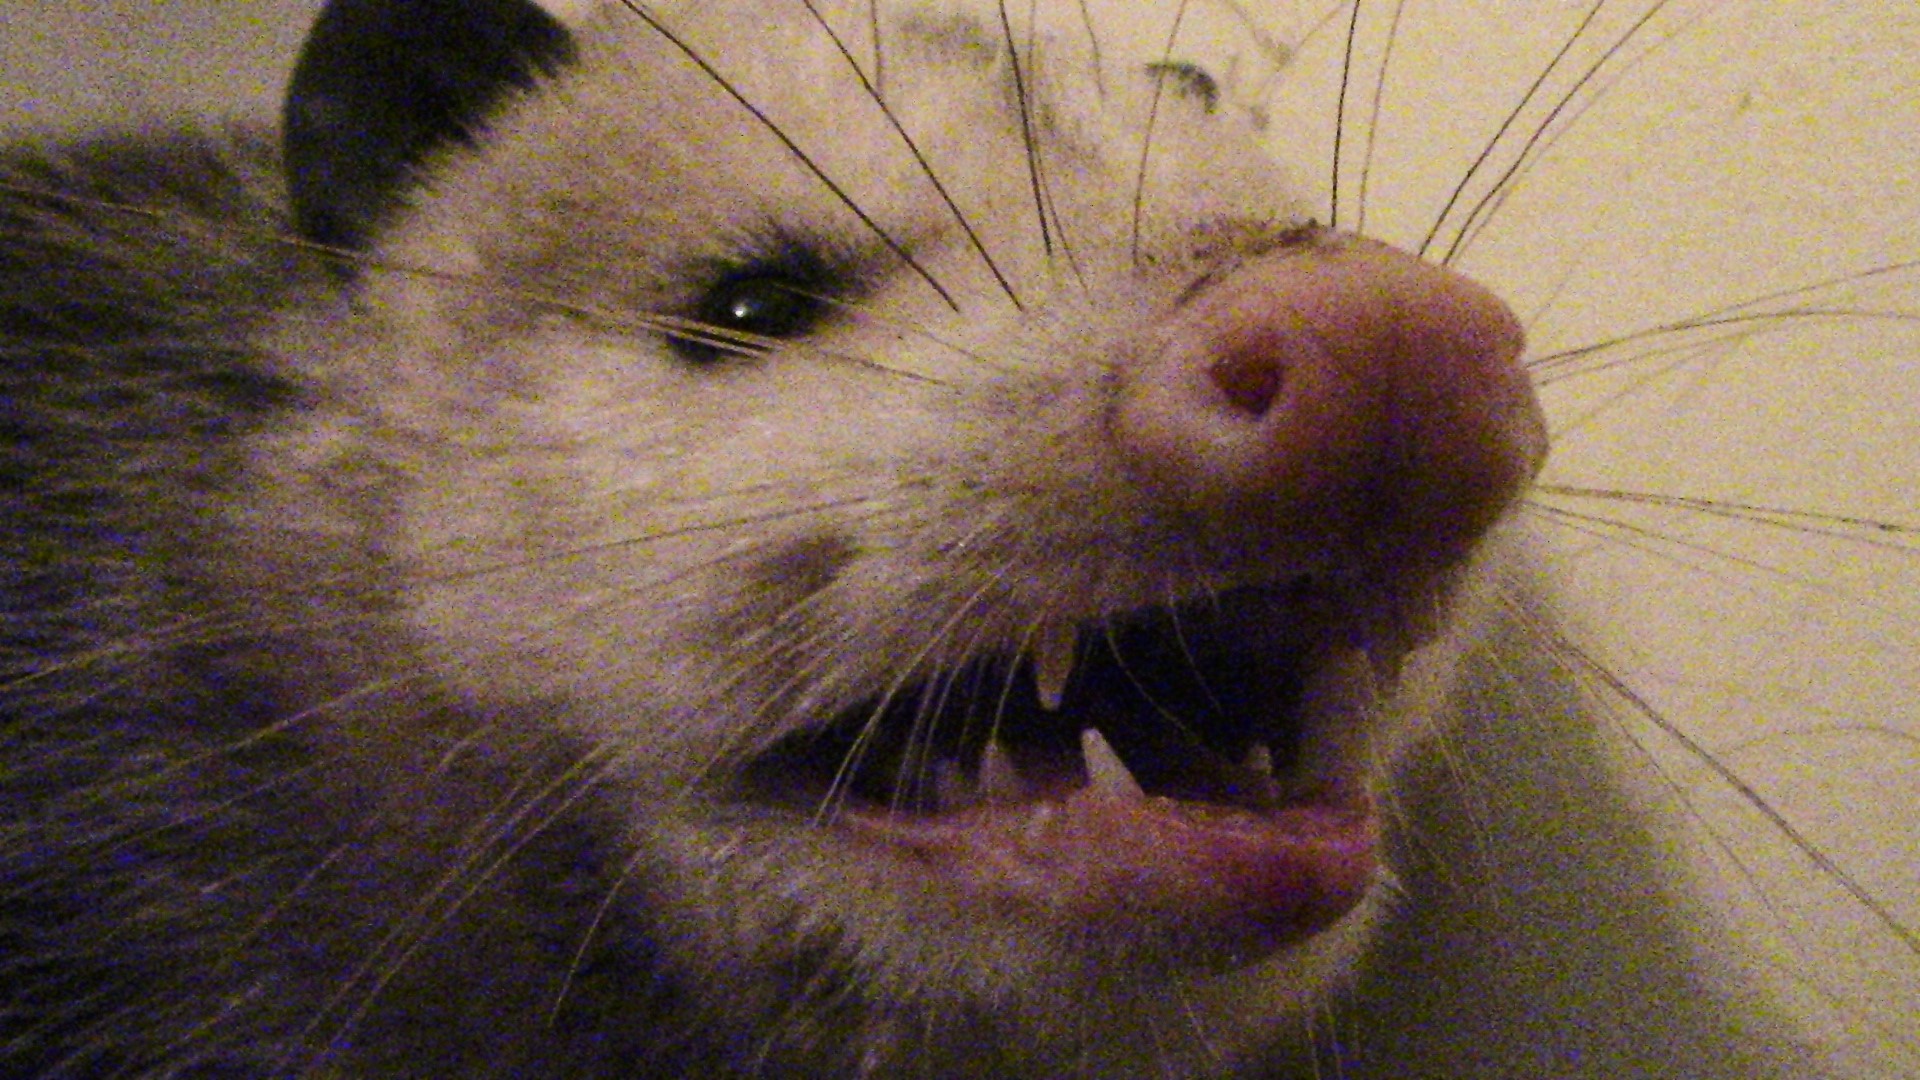 I woke up to find an opossum in my bathroom this morning. Here's what I did.